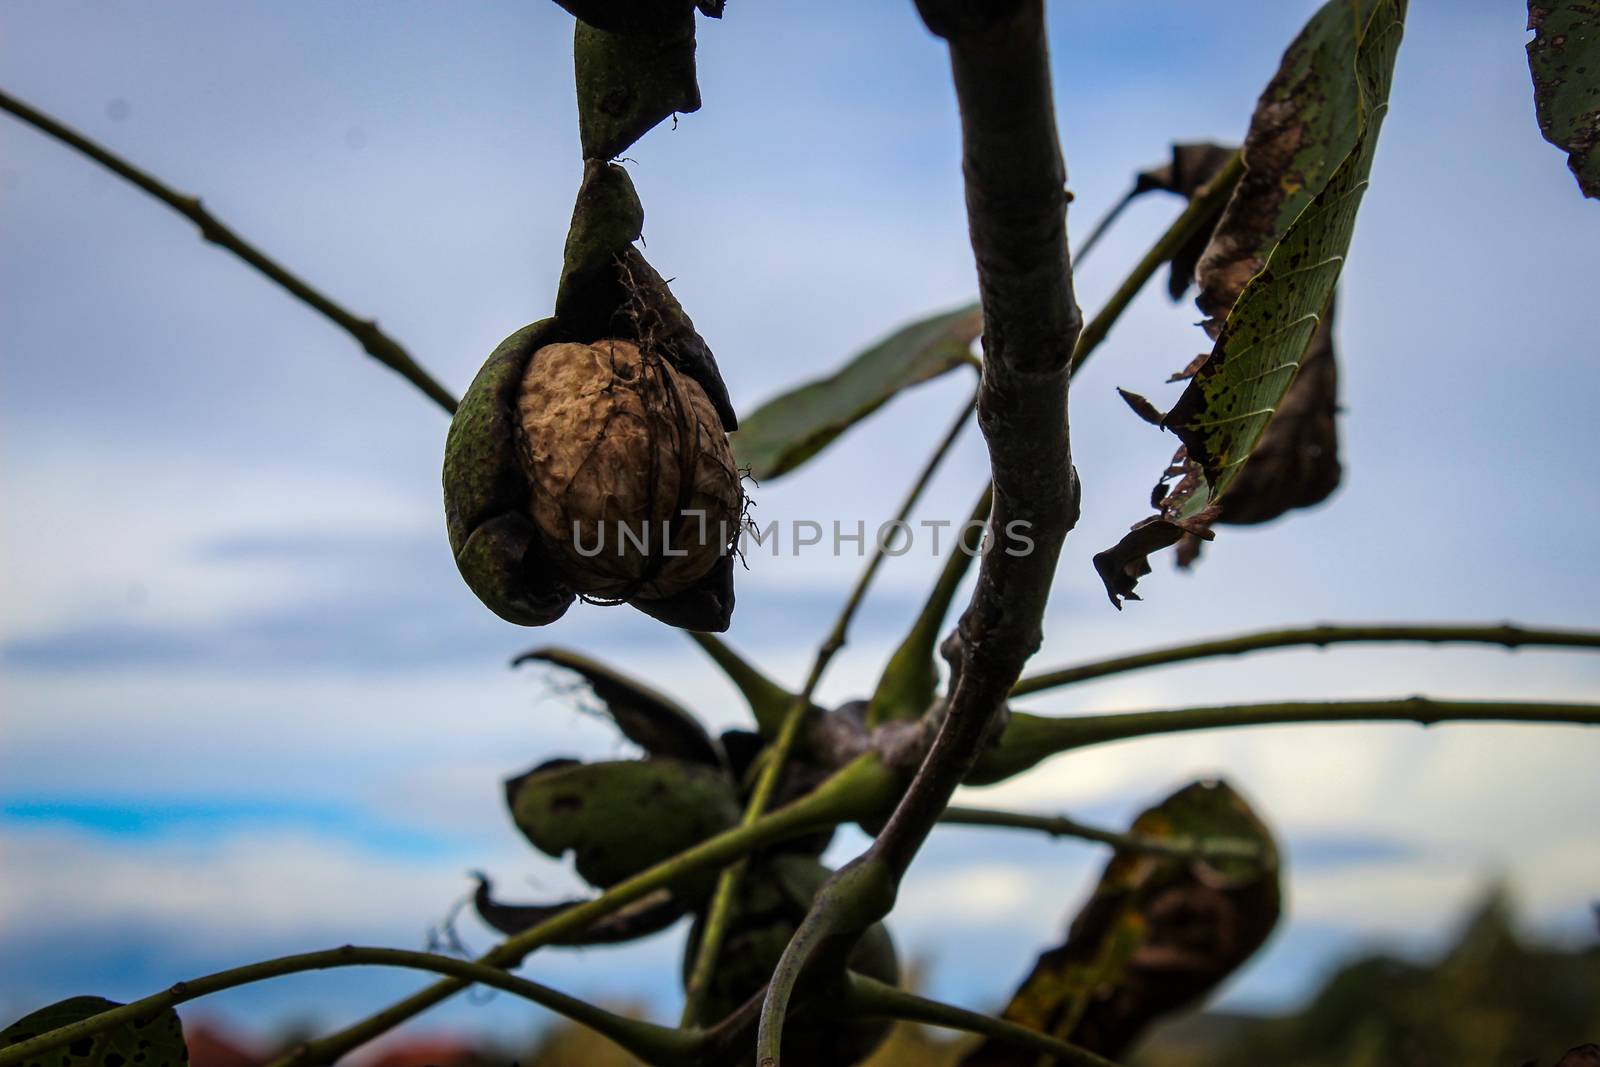 A walnut on a branch that almost came out of a green shell, in the background a cloudy sky. Zavidovici, Bosnia and Herzegovina.